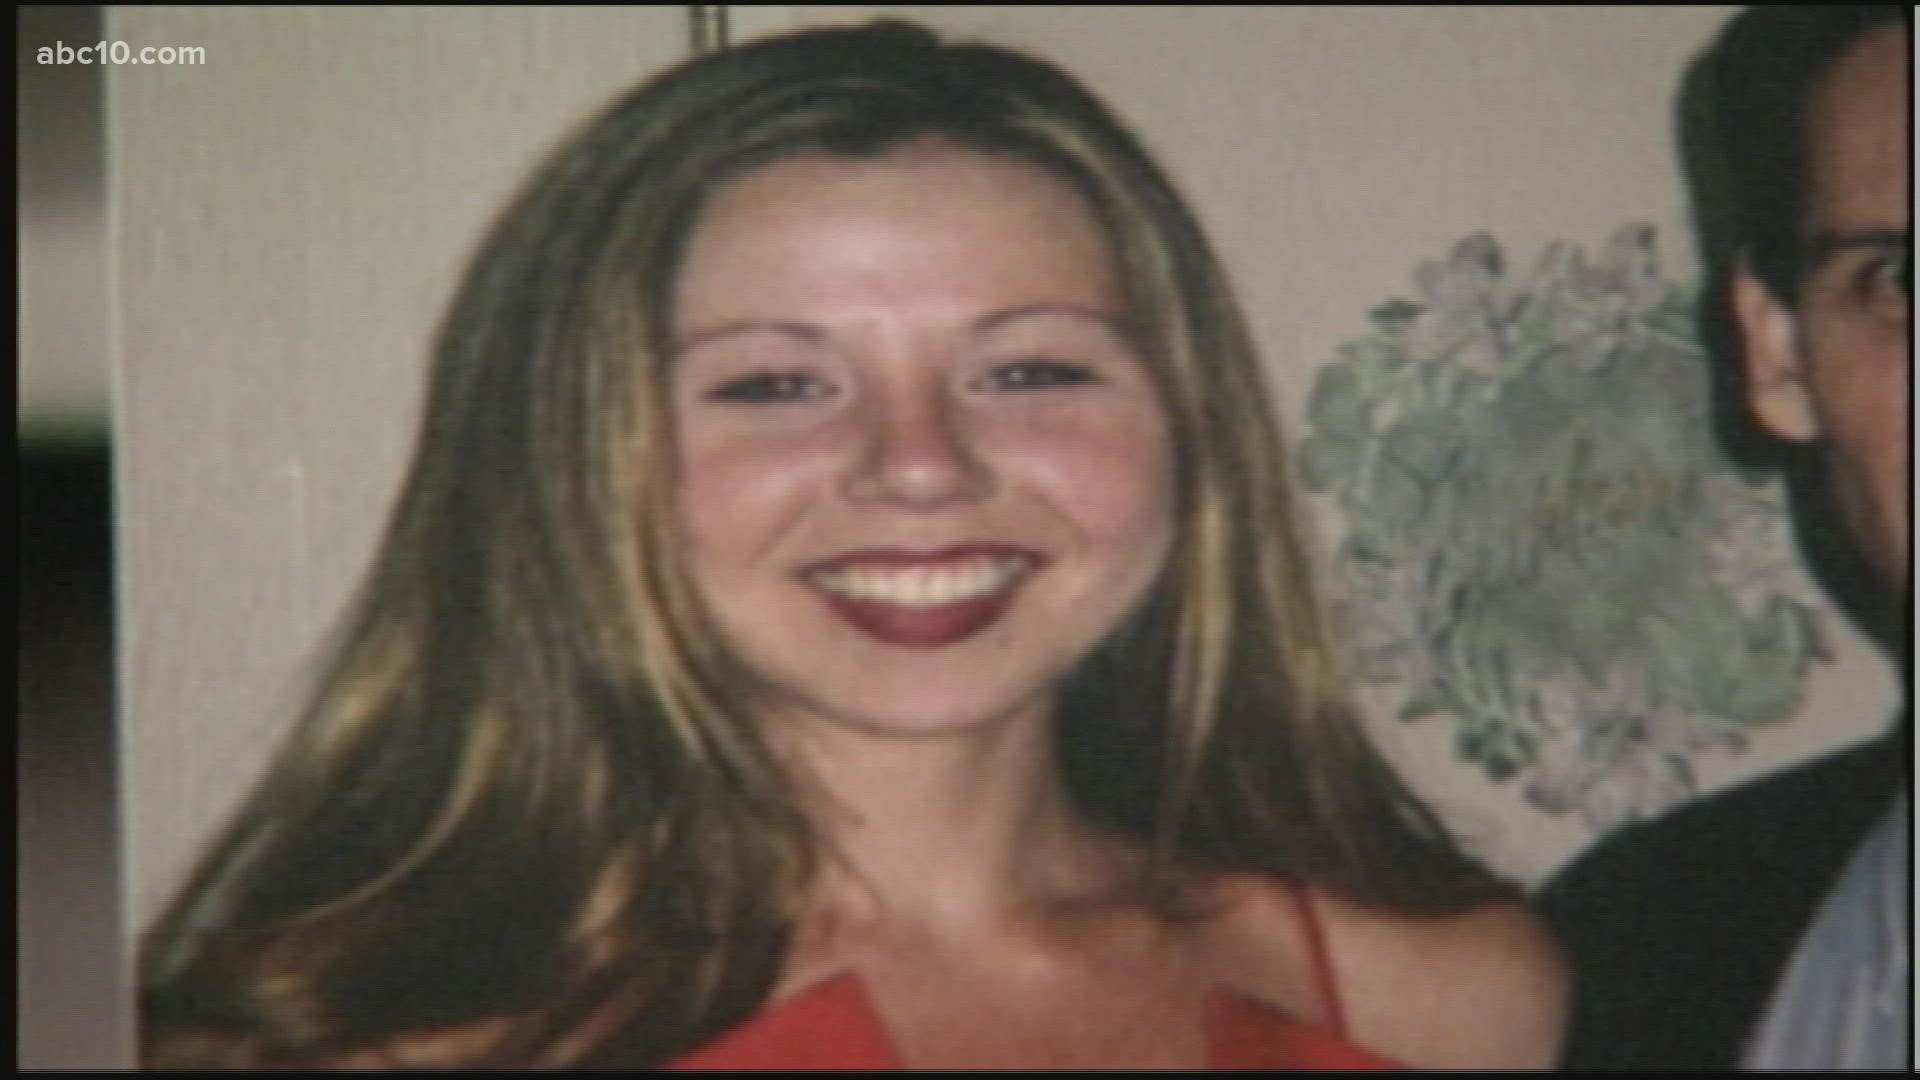 The family of Heather Hibbs has been looking for answers for 20 years in her death. Her case remains unsolved.